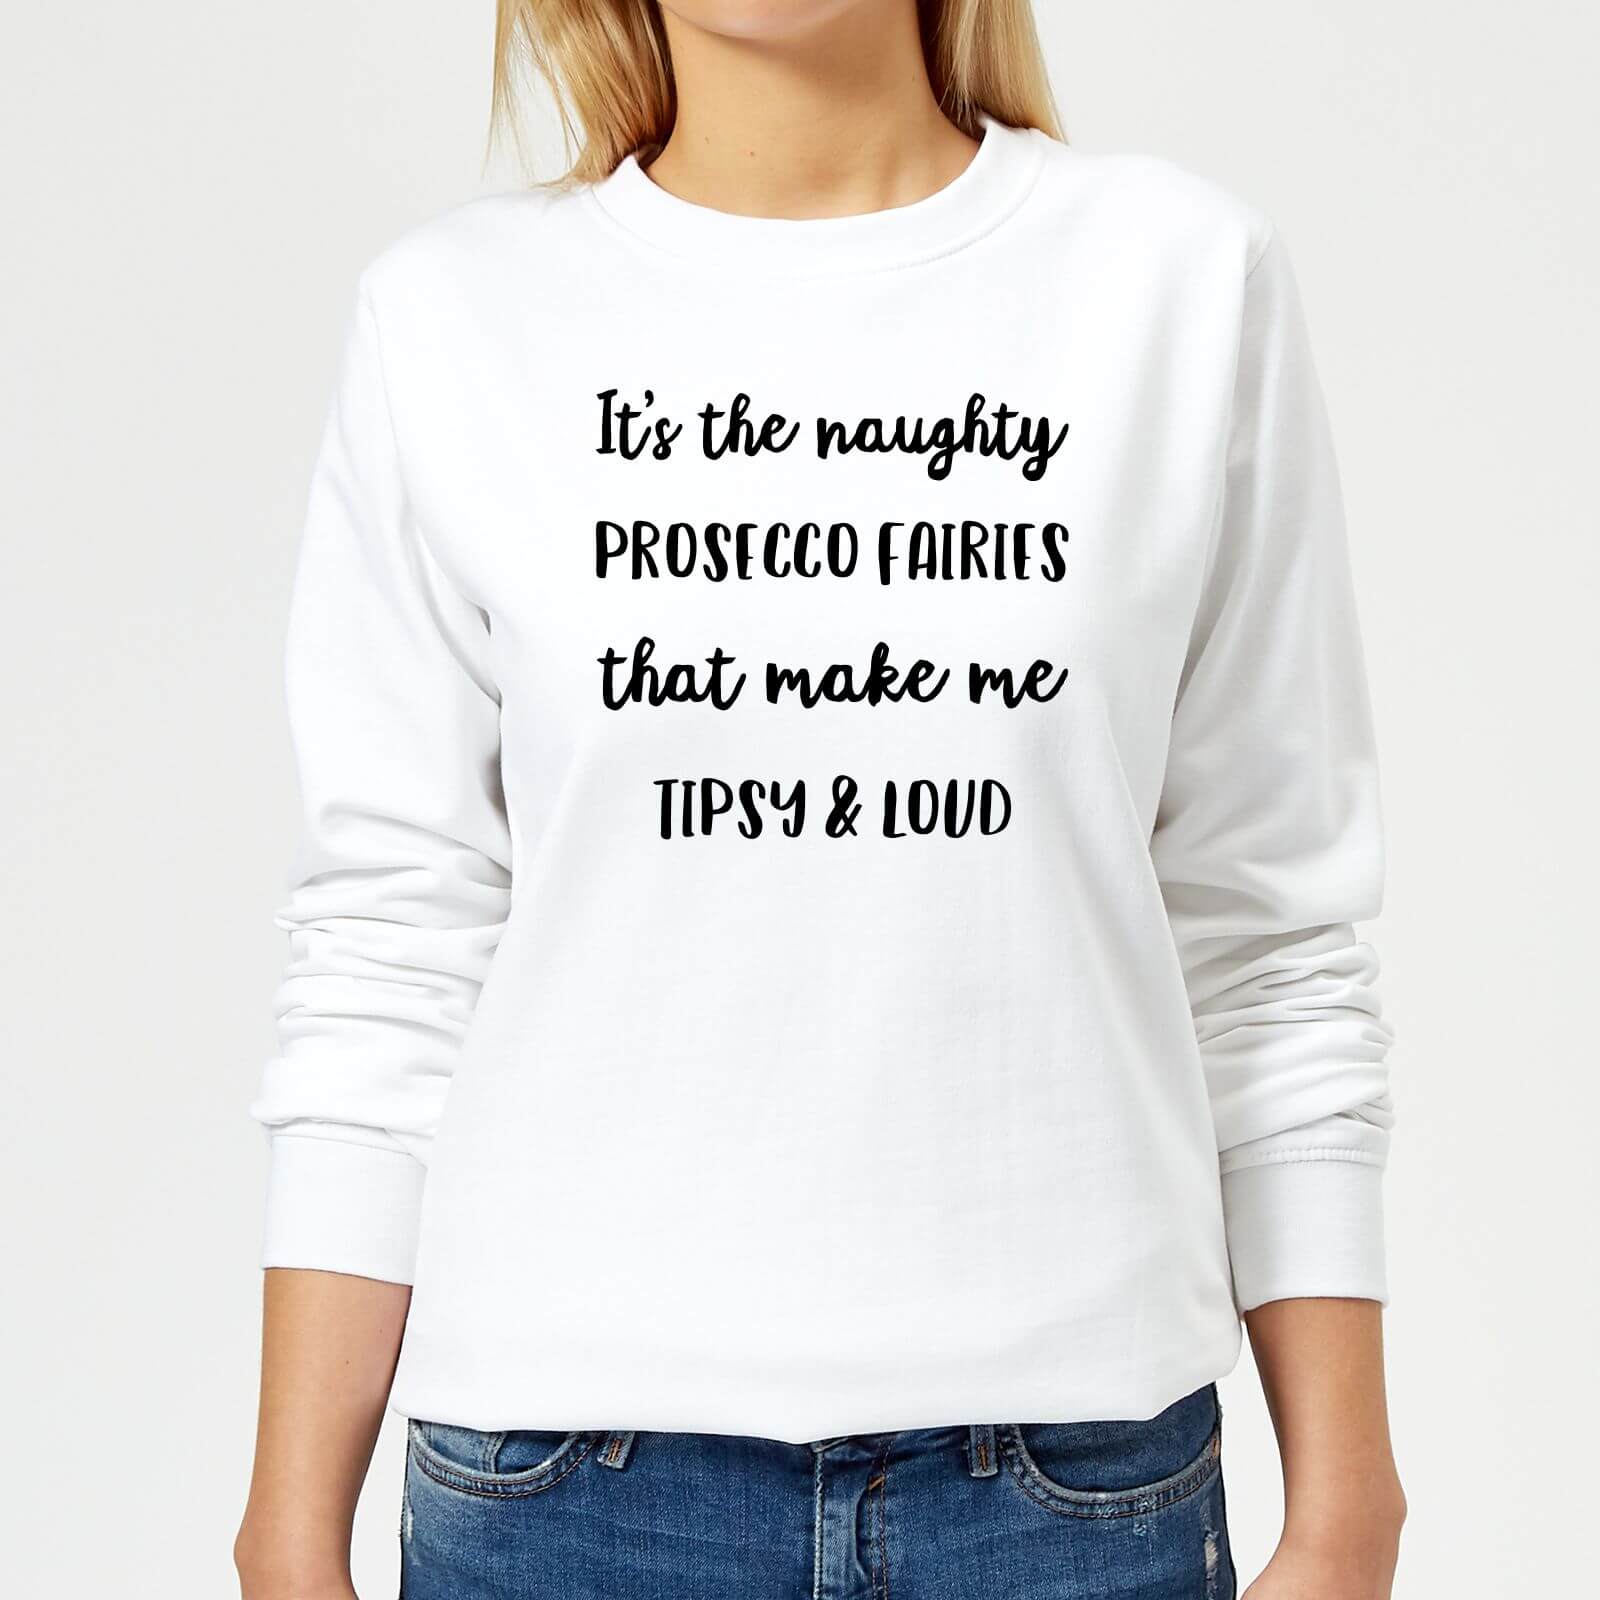 It's The Naughty Prosecco Fairies That Make Me Tipsy and Loud Women's Christmas Sweatshirt - White - XS - White